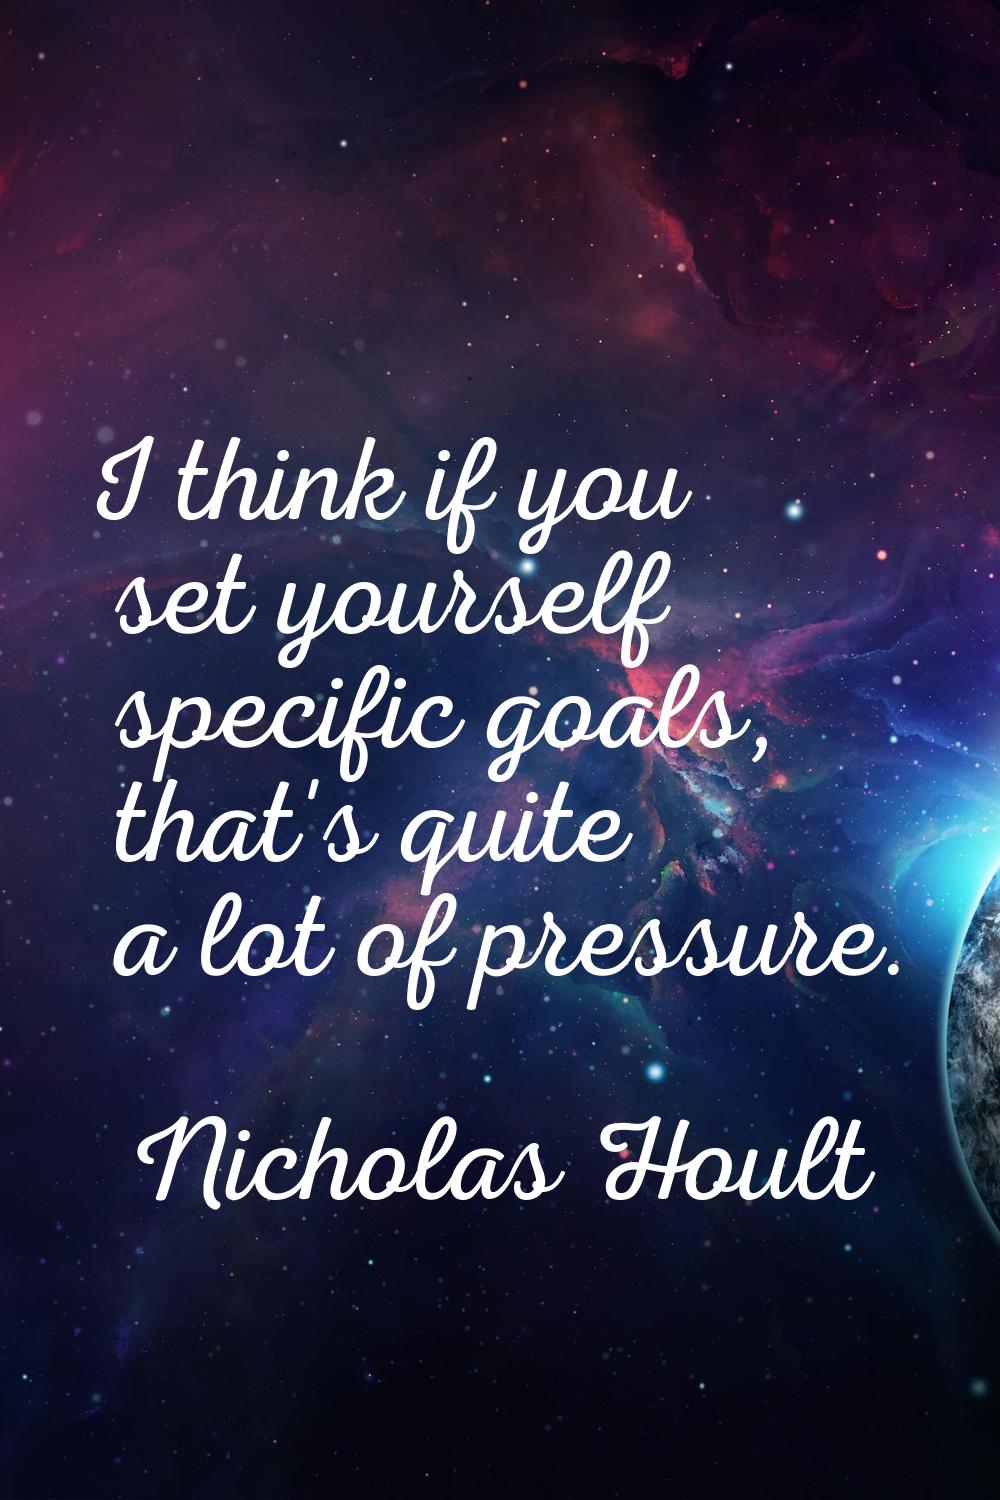 I think if you set yourself specific goals, that's quite a lot of pressure.